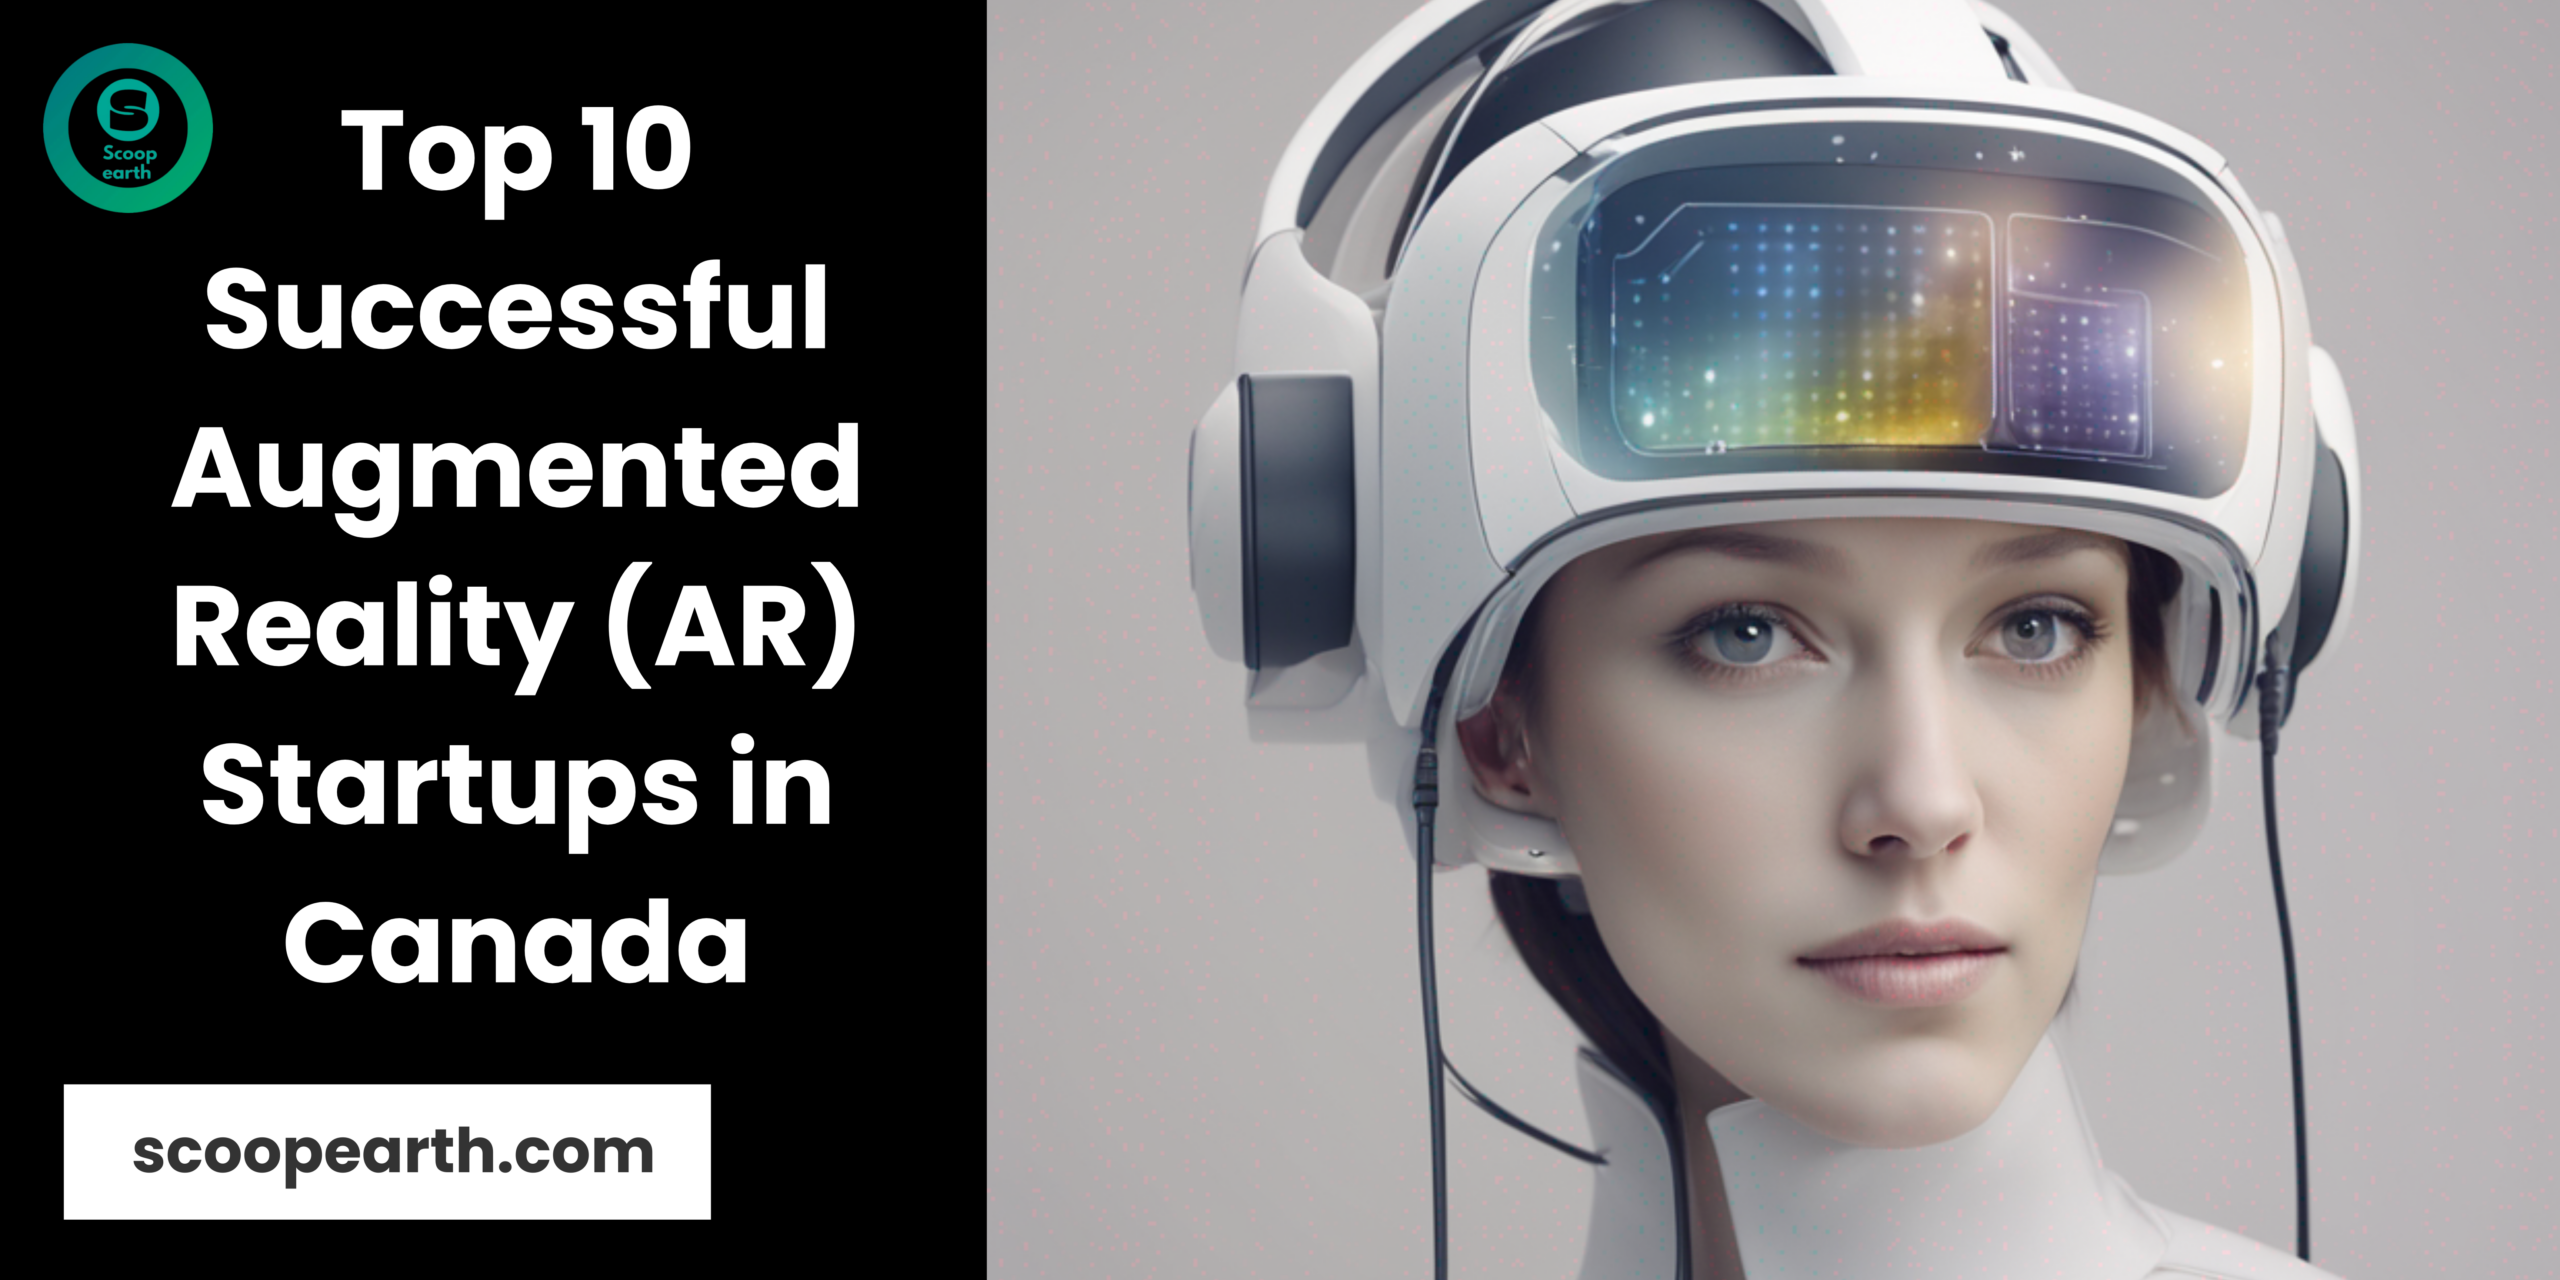 Top 10 successful Augmented Reality (AR) startups in Canada (1)